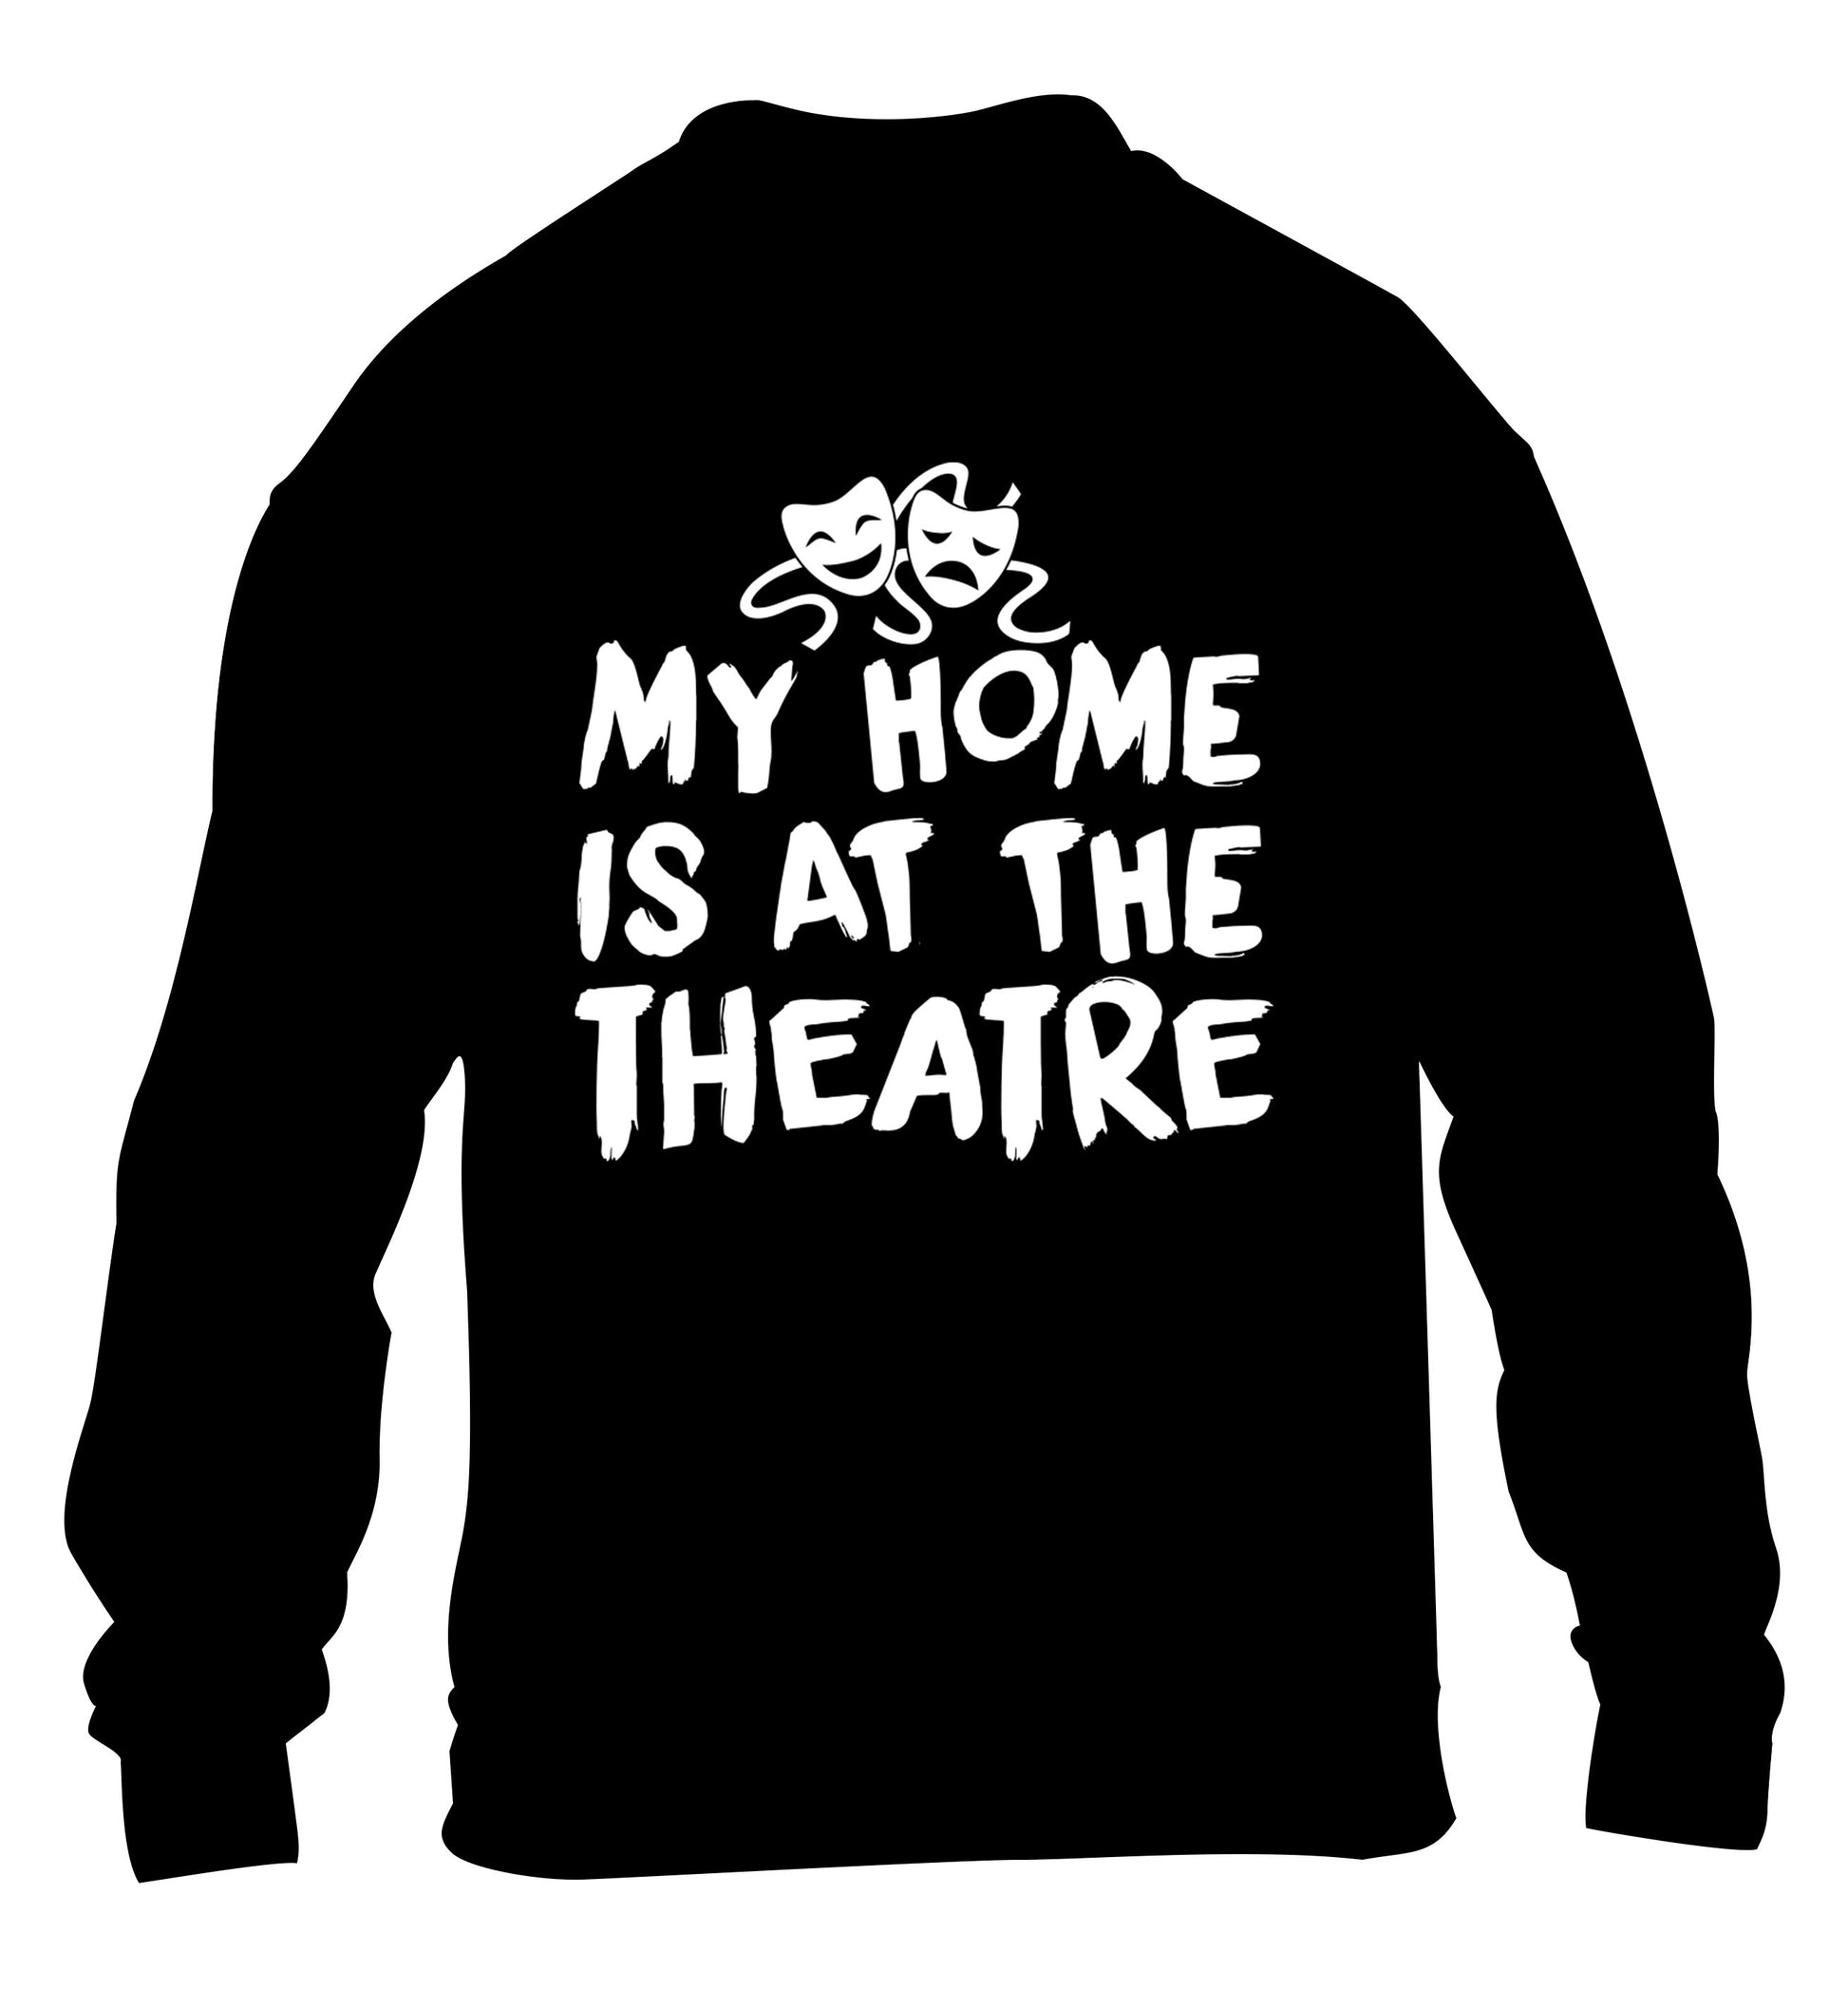 My home is at the theatre children's black sweater 12-14 Years